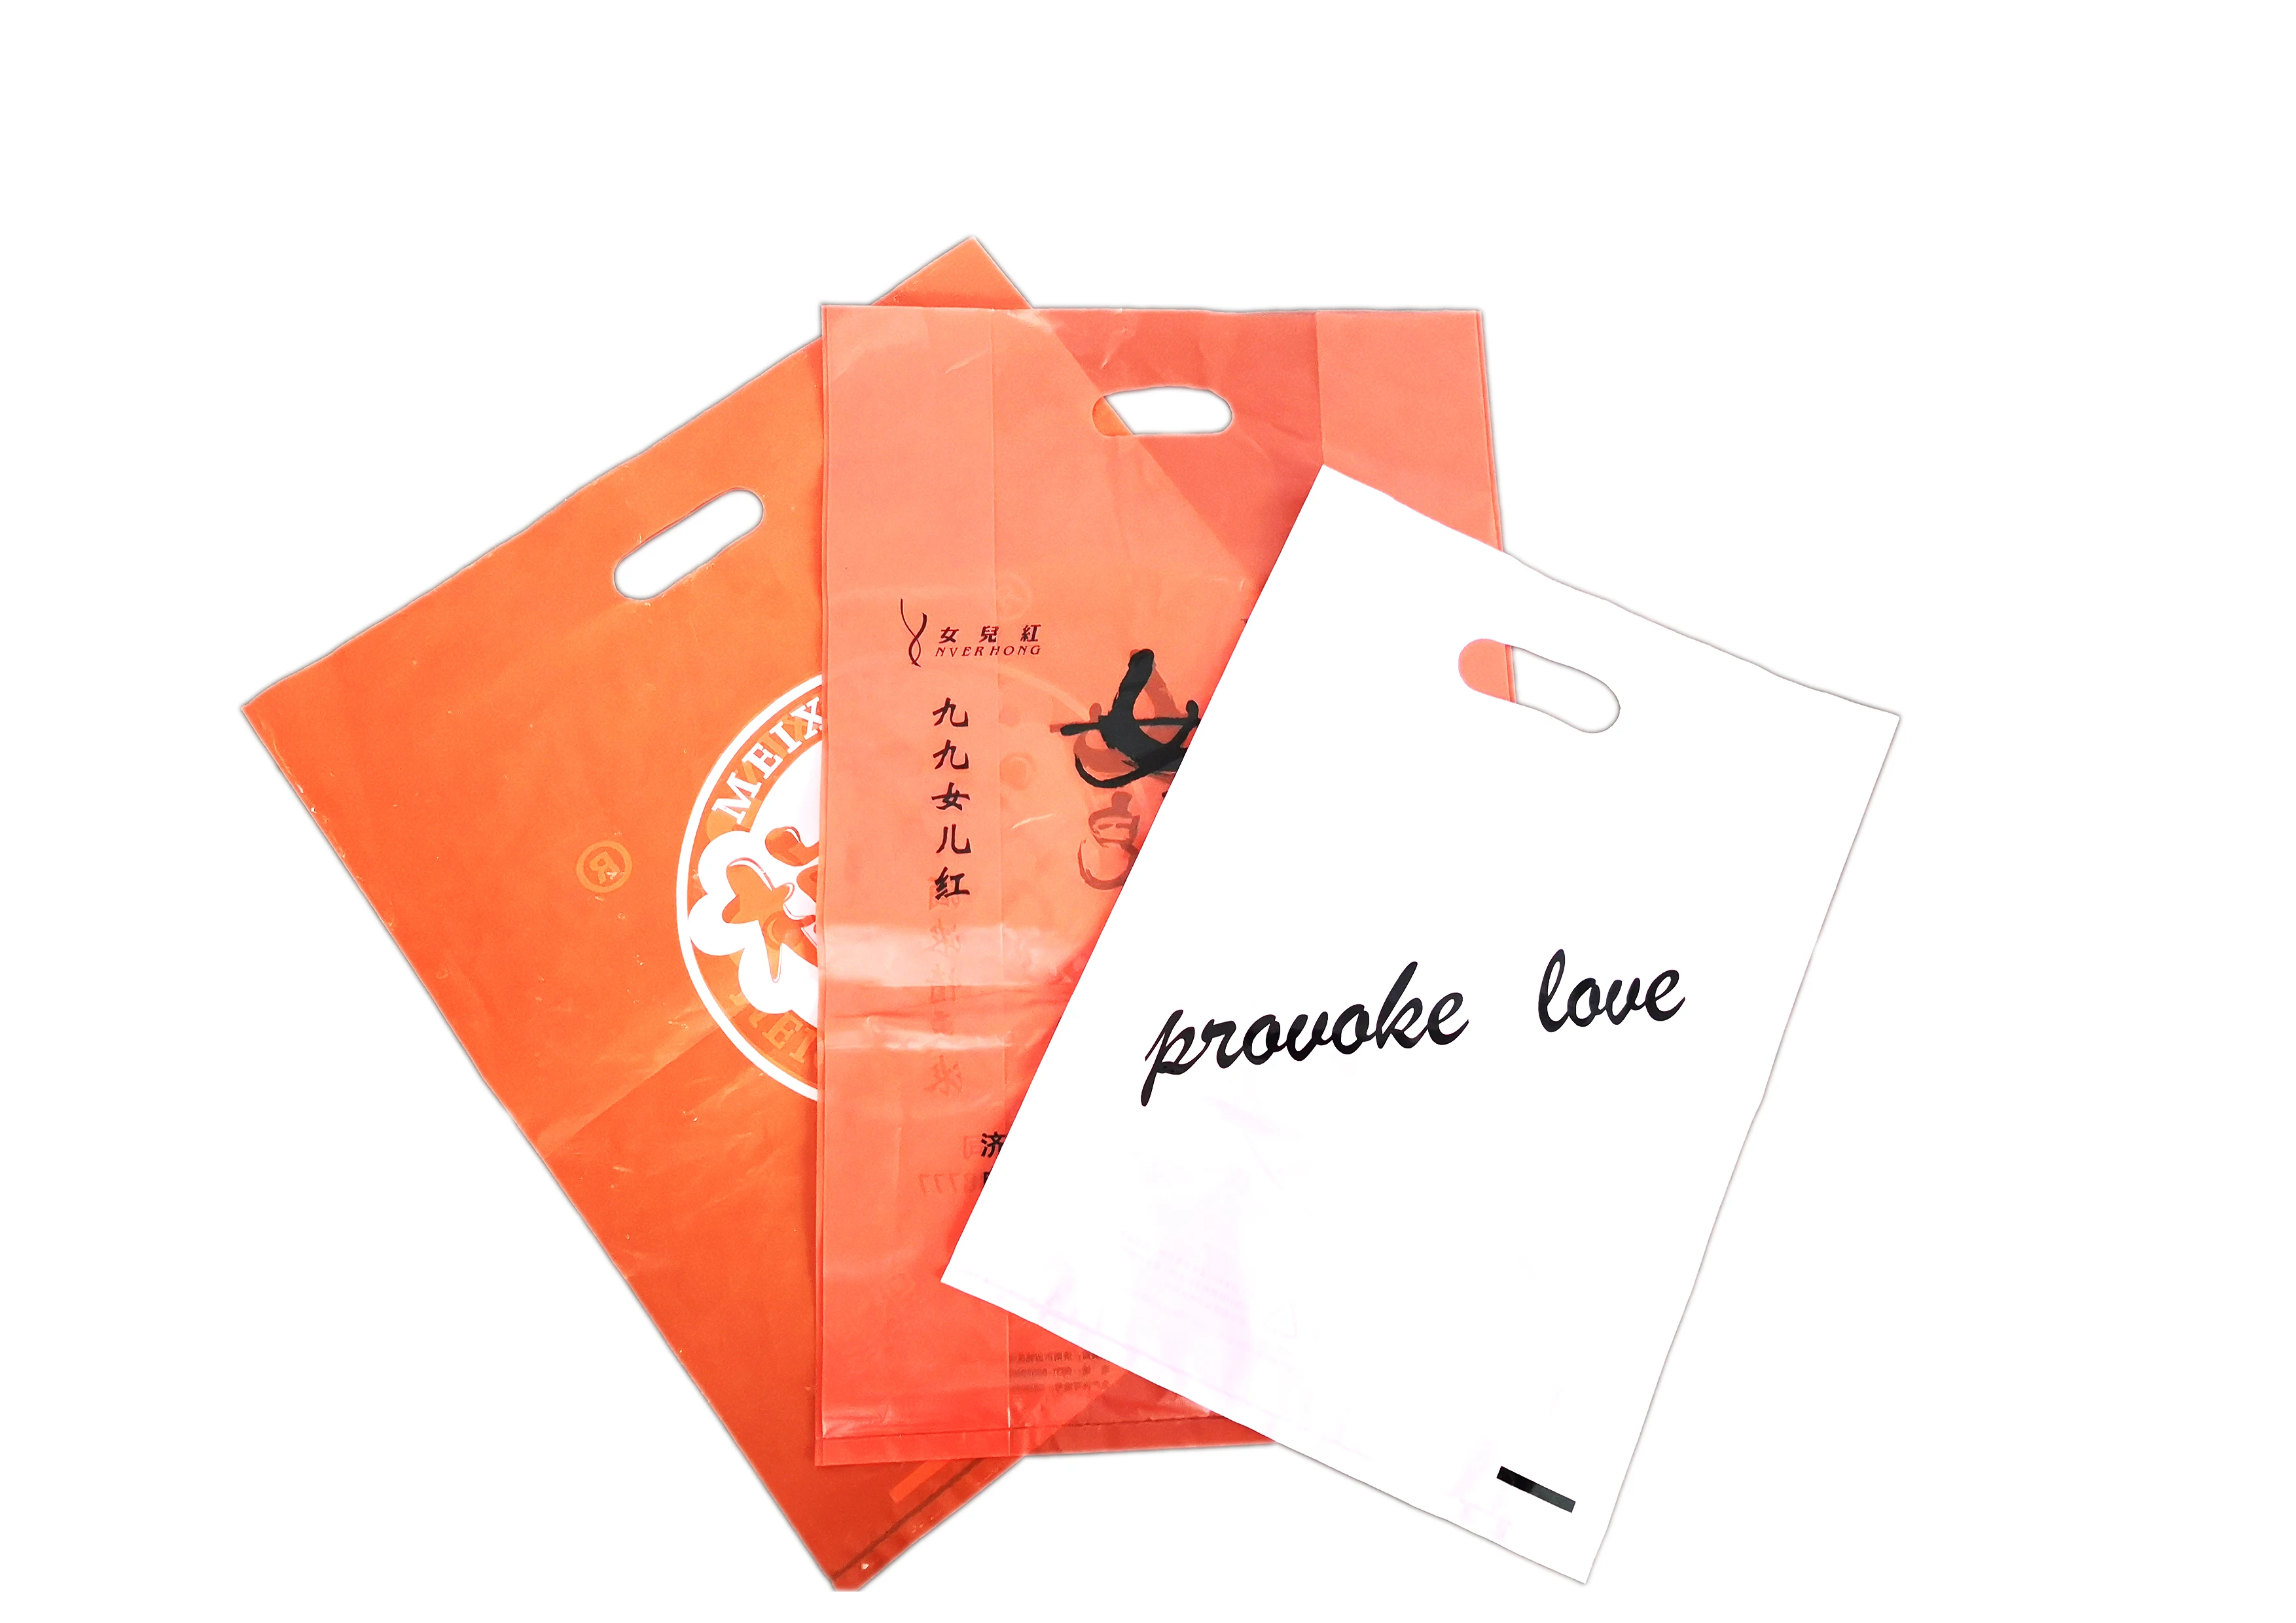 Custom Size Colored Biodegradable Plastic shopping Bags